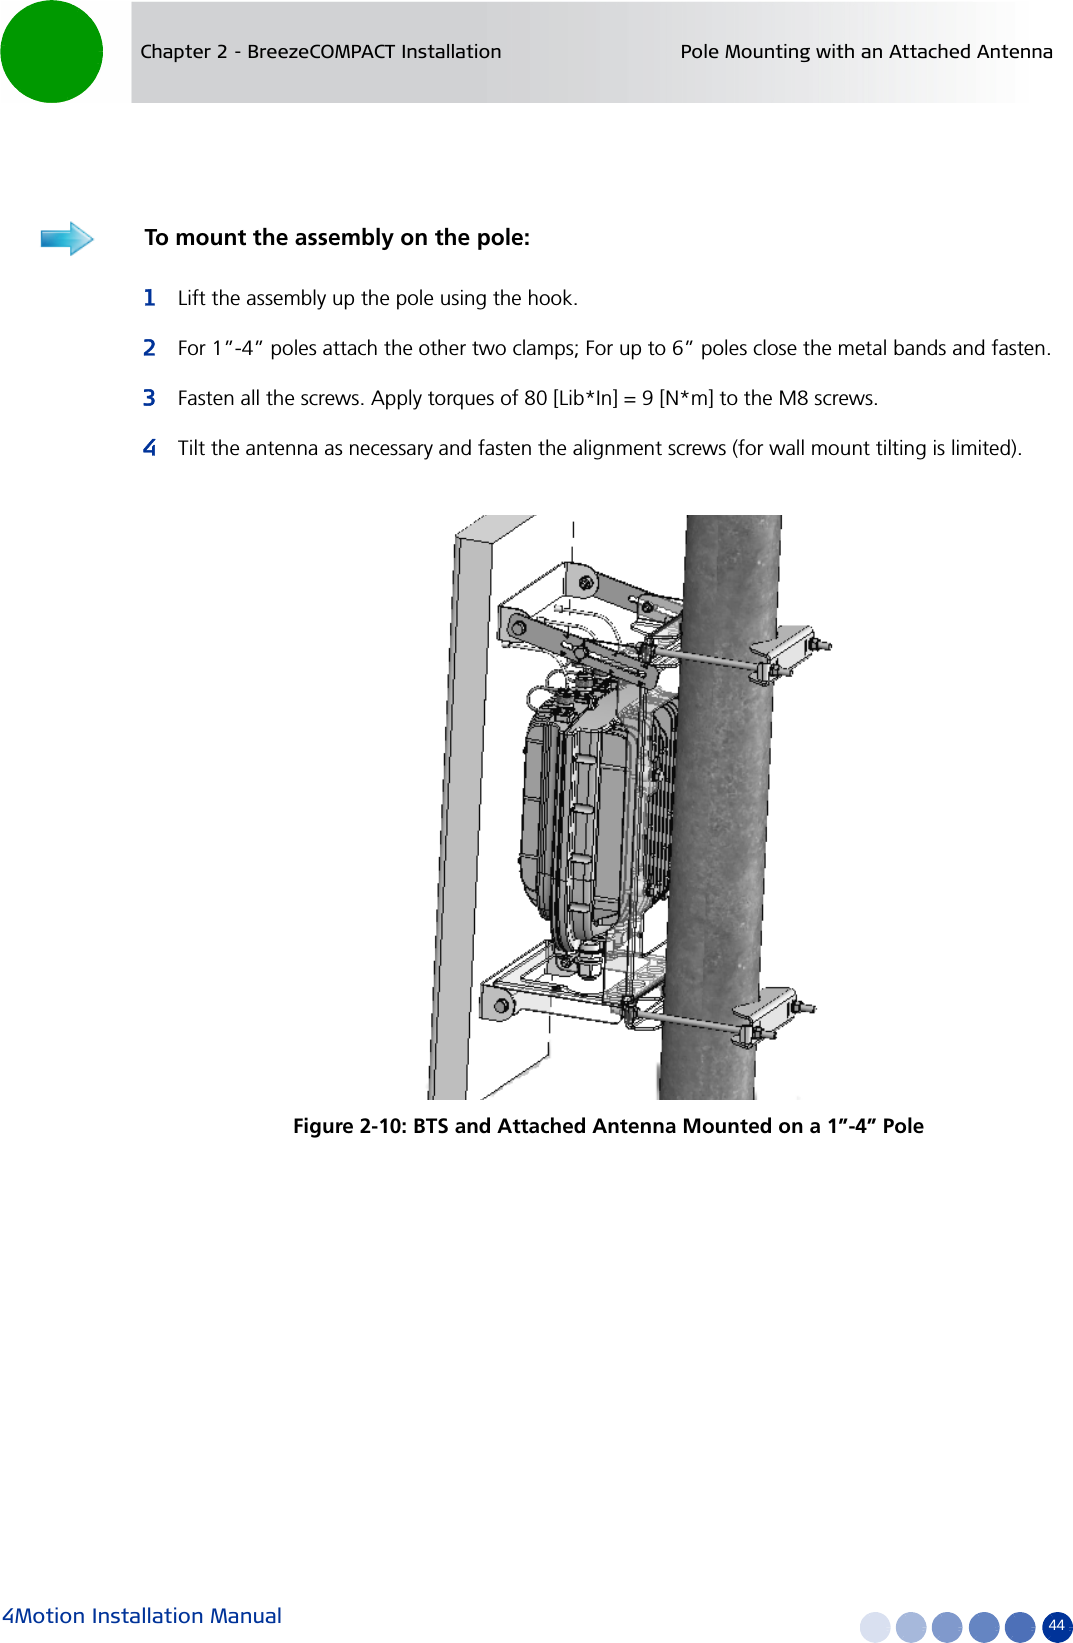 4Motion Installation Manual 44Chapter 2 - BreezeCOMPACT Installation Pole Mounting with an Attached Antenna1Lift the assembly up the pole using the hook.2For 1”-4” poles attach the other two clamps; For up to 6” poles close the metal bands and fasten.3Fasten all the screws. Apply torques of 80 [Lib*In] = 9 [N*m] to the M8 screws.4Tilt the antenna as necessary and fasten the alignment screws (for wall mount tilting is limited).To mount the assembly on the pole:Figure 2-10: BTS and Attached Antenna Mounted on a 1”-4” Pole